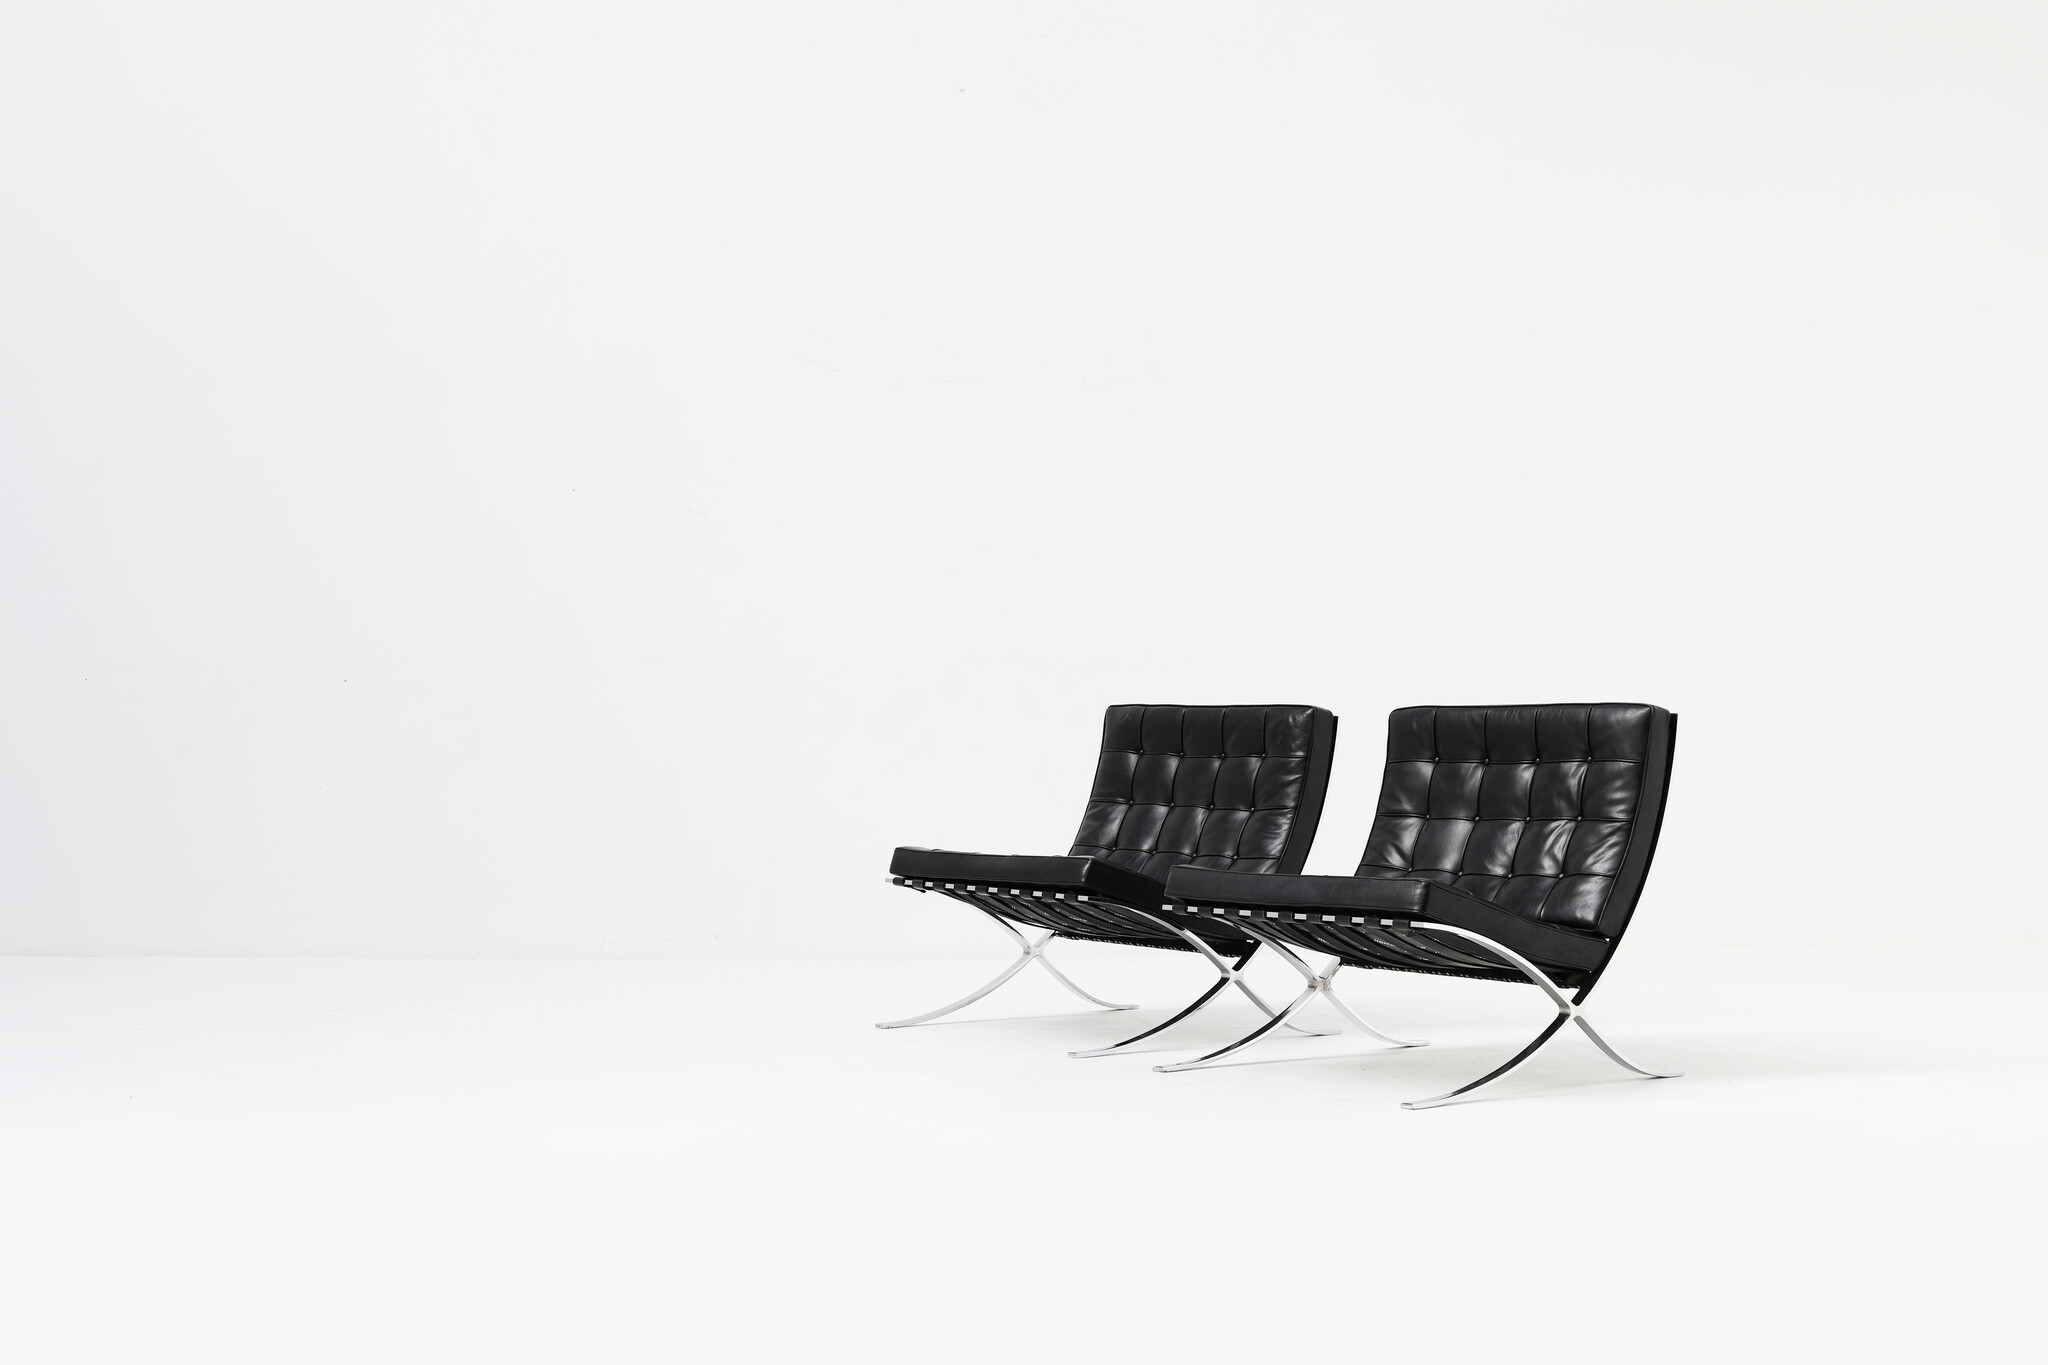 Pair of vintage Barcelona chairs by Ludwig Mies van der rohe